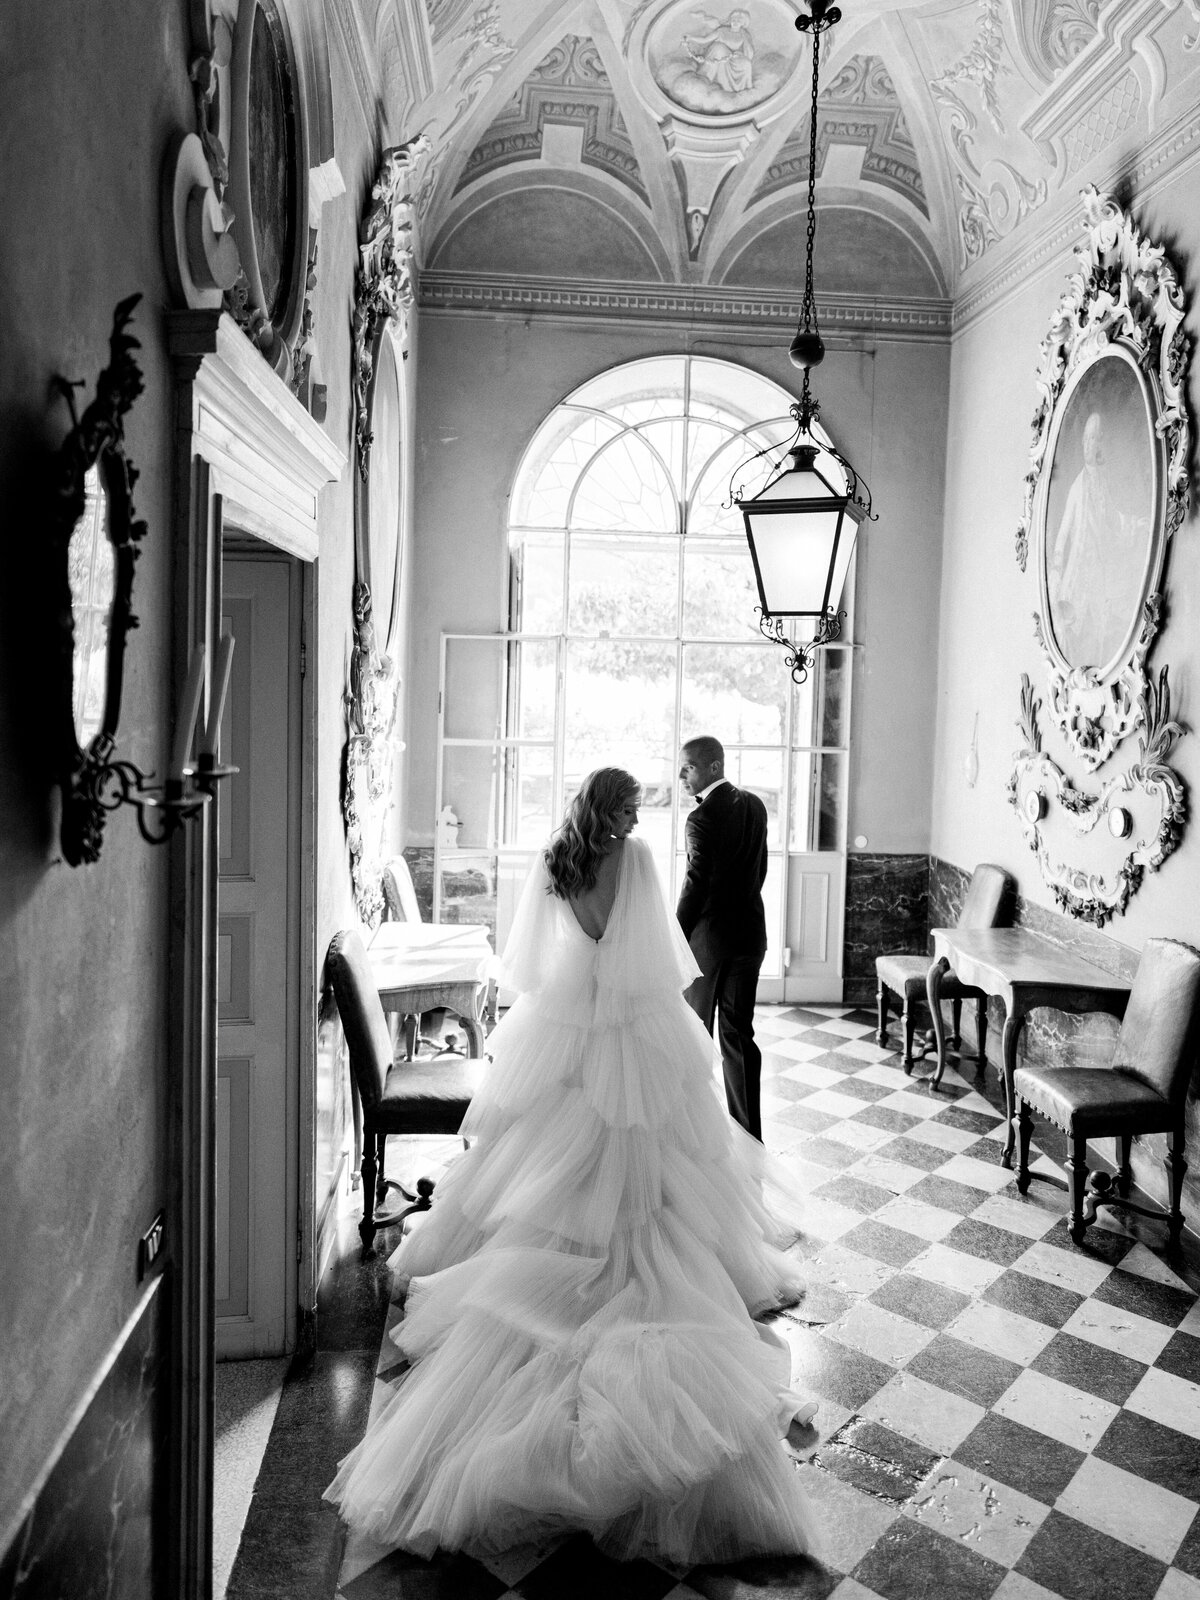 Liz Andolina Photography Destination Wedding Photographer in Italy, New York, Across the East Coast Editorial, heritage-quality images for stylish couples Villa Pizzo Editorial-Liz Andolina Photography-190